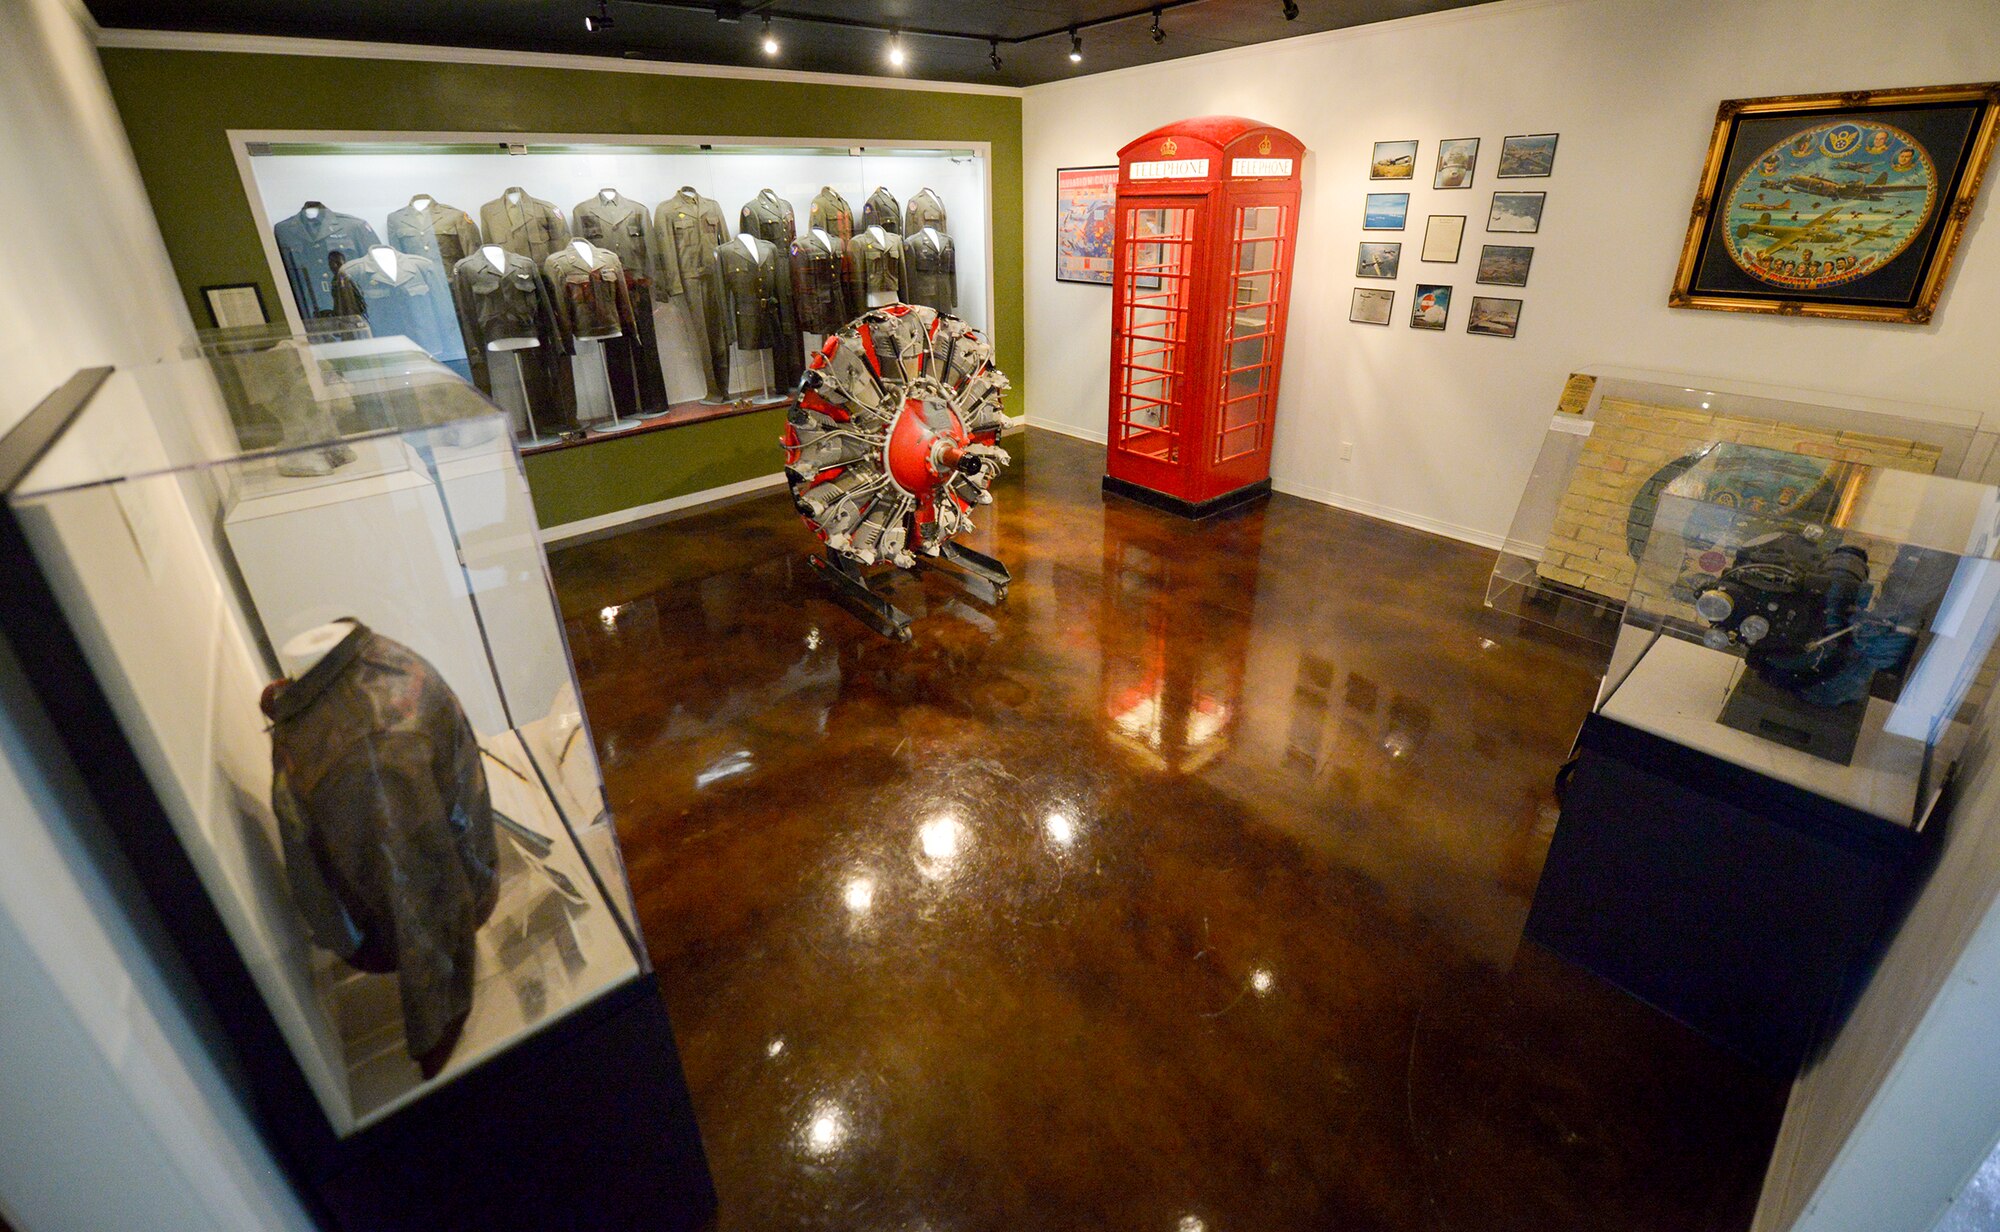 The museum’s World War II room features uniforms from all the numbered air forces at the time, as well as other artifacts depicting the Air Force’s role in the conflict. (U.S. Air Force photo/Airman 1st Class Mozer O. Da Cunha)